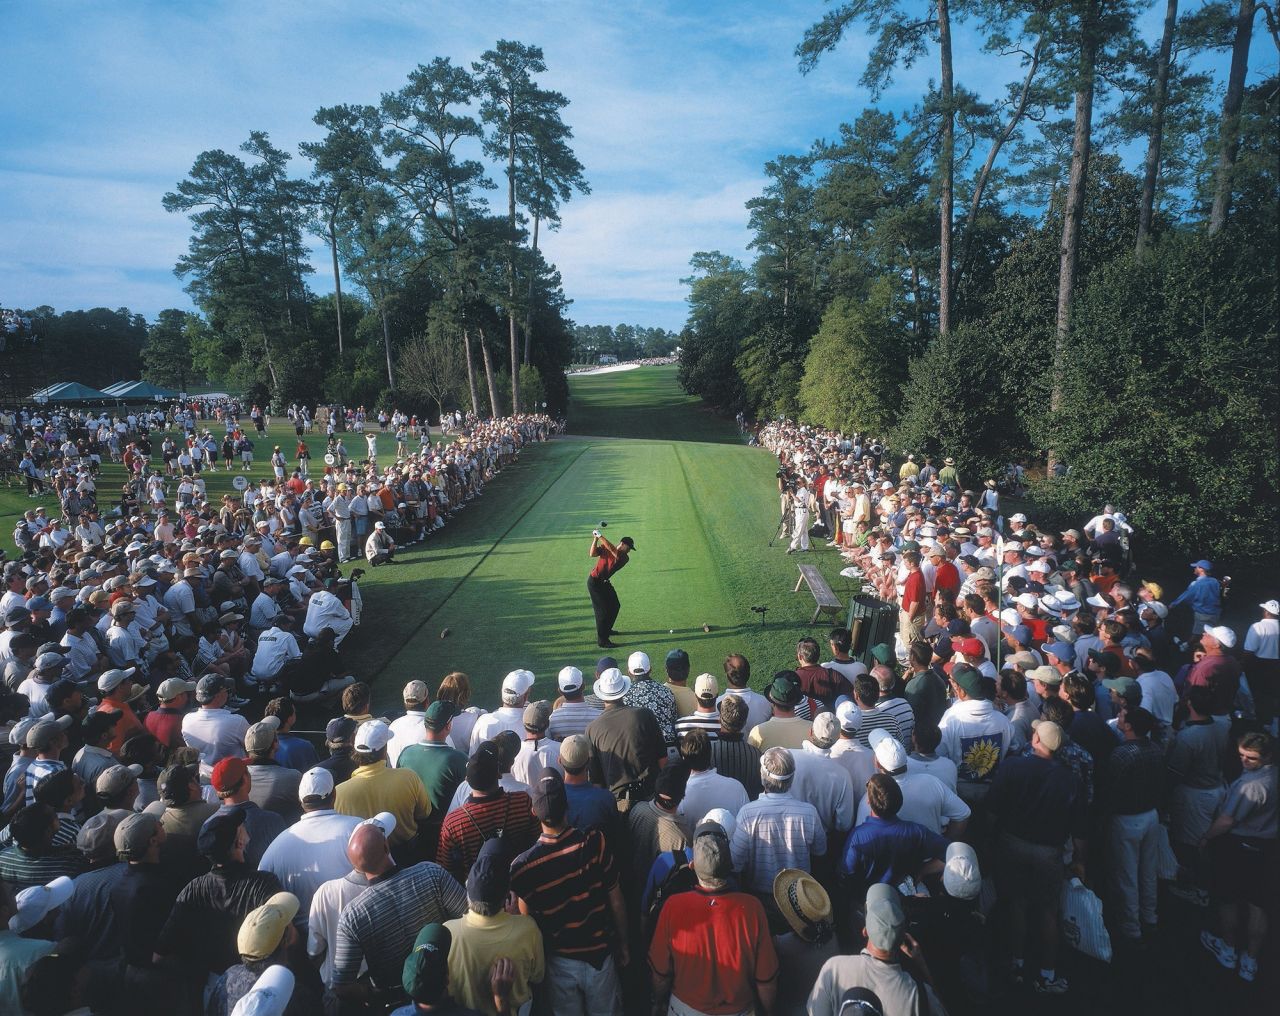 Fans watch Woods tee off on the 18th hole at the 2001 Masters. Woods went on to win the event and complete what's now called the Tiger Slam — four consecutive major titles.